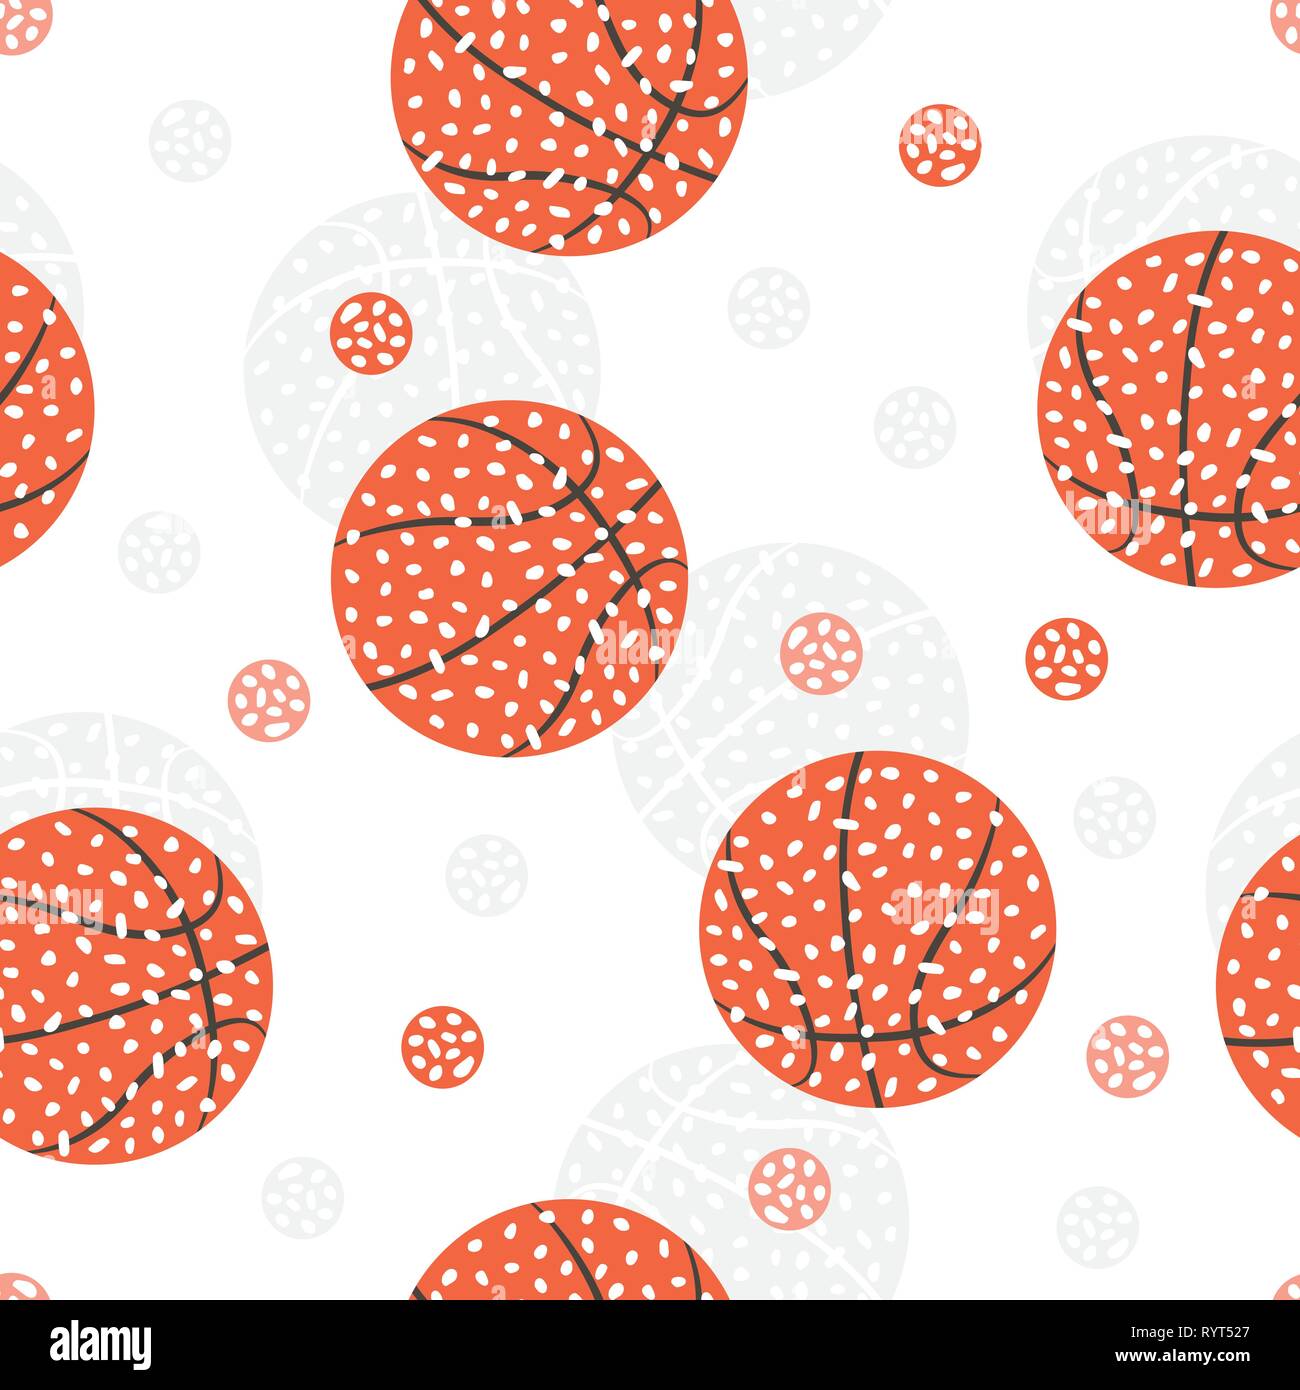 Seamless pattern with basketball Abstract background Stock Vector